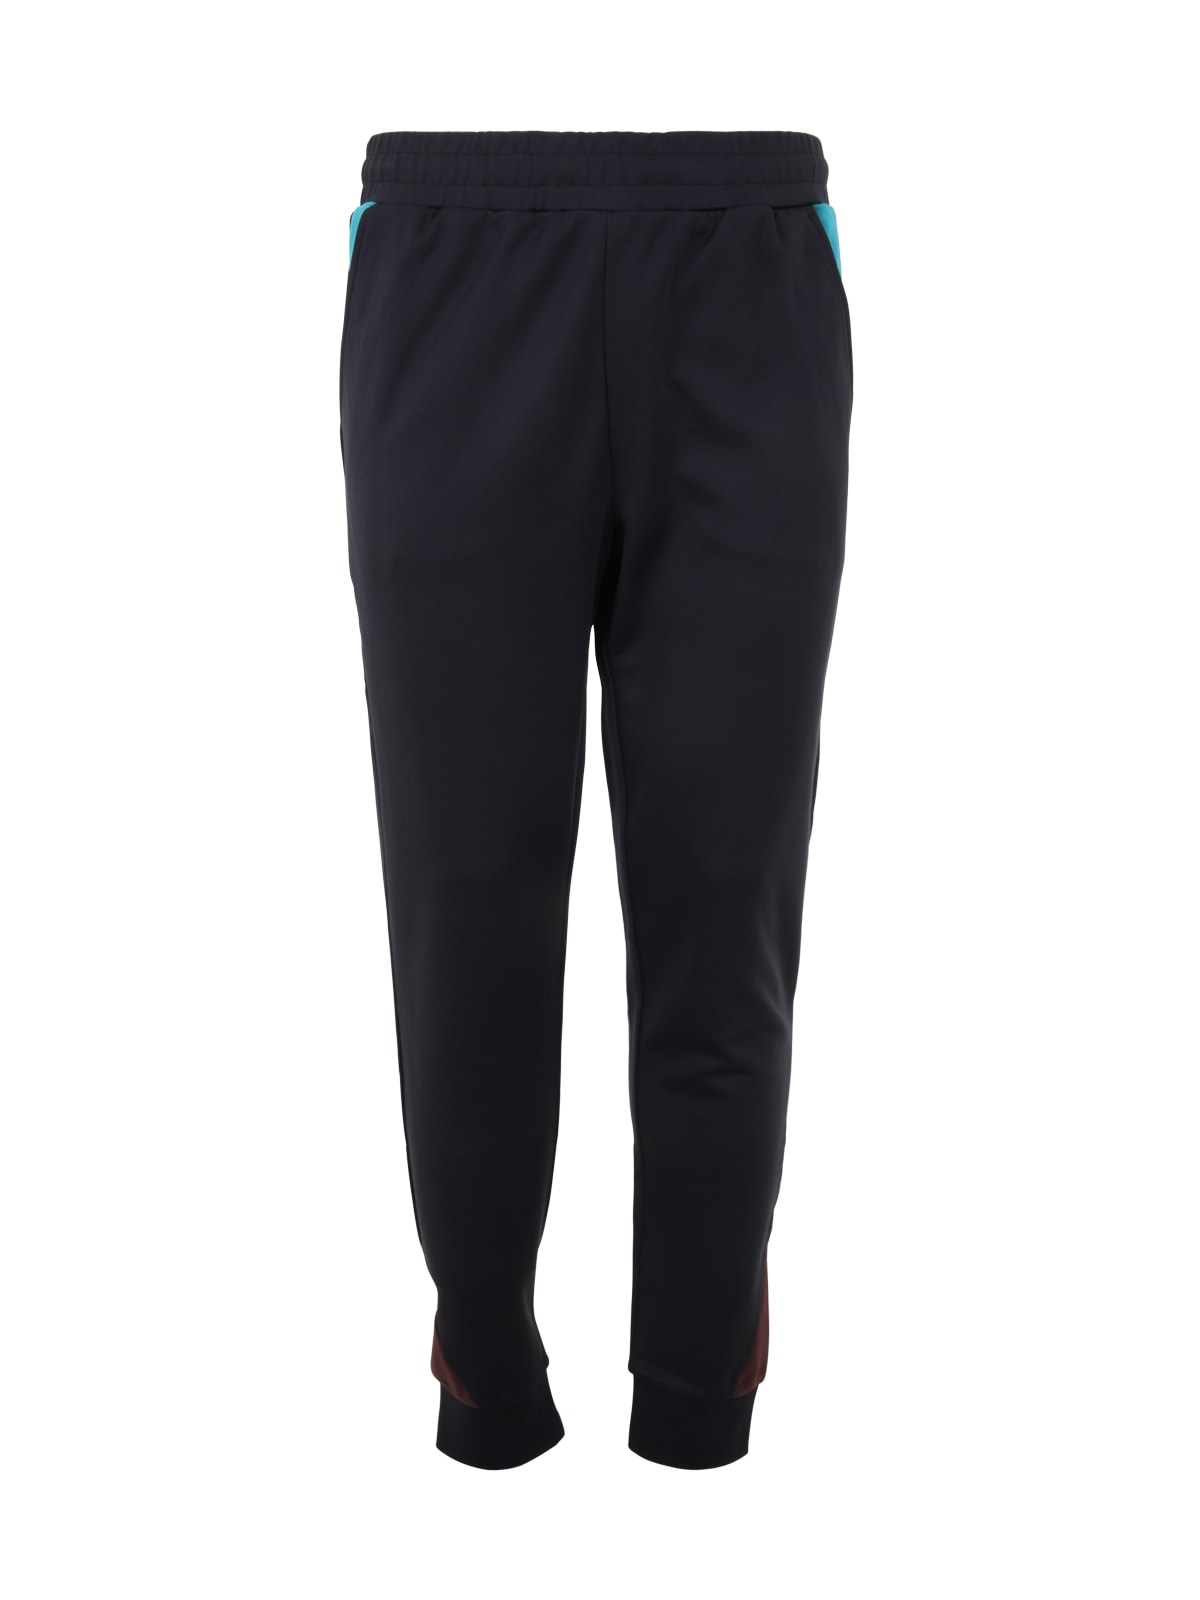 PS by Paul Smith Mens Sweat Pants